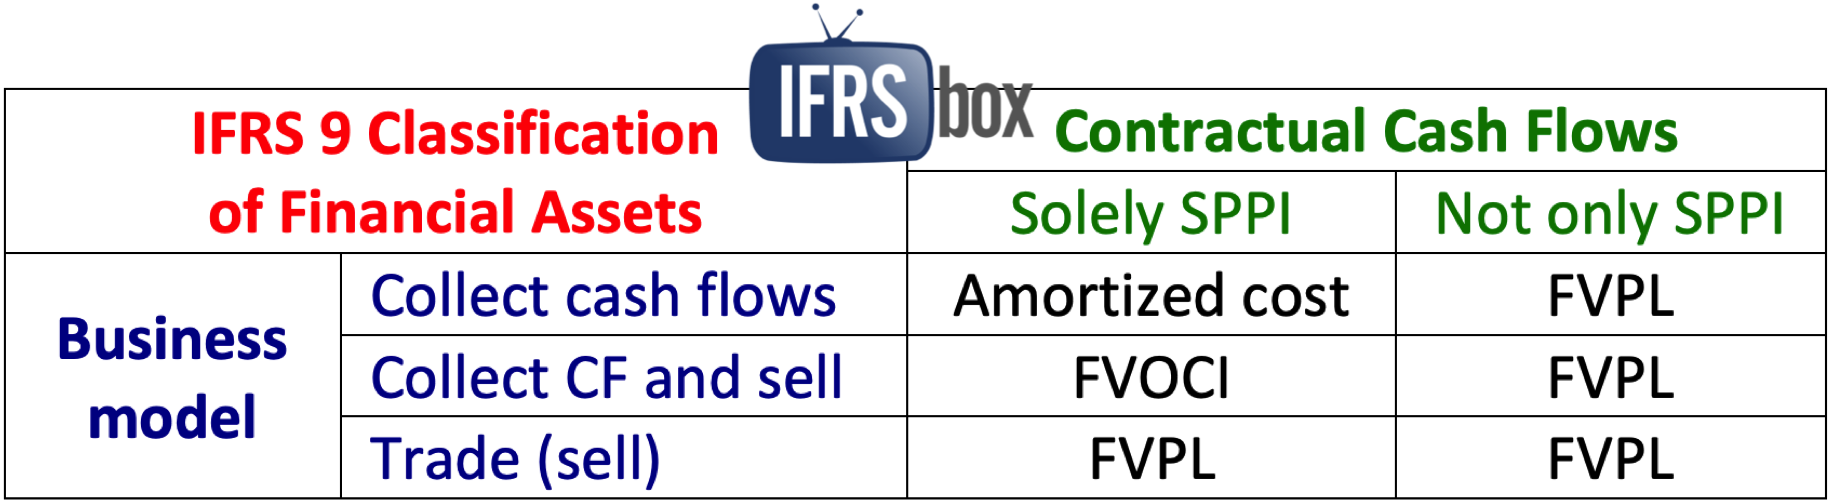 Expected Credit Loss On Intercompany Loans Ifrsbox Making Ifrs